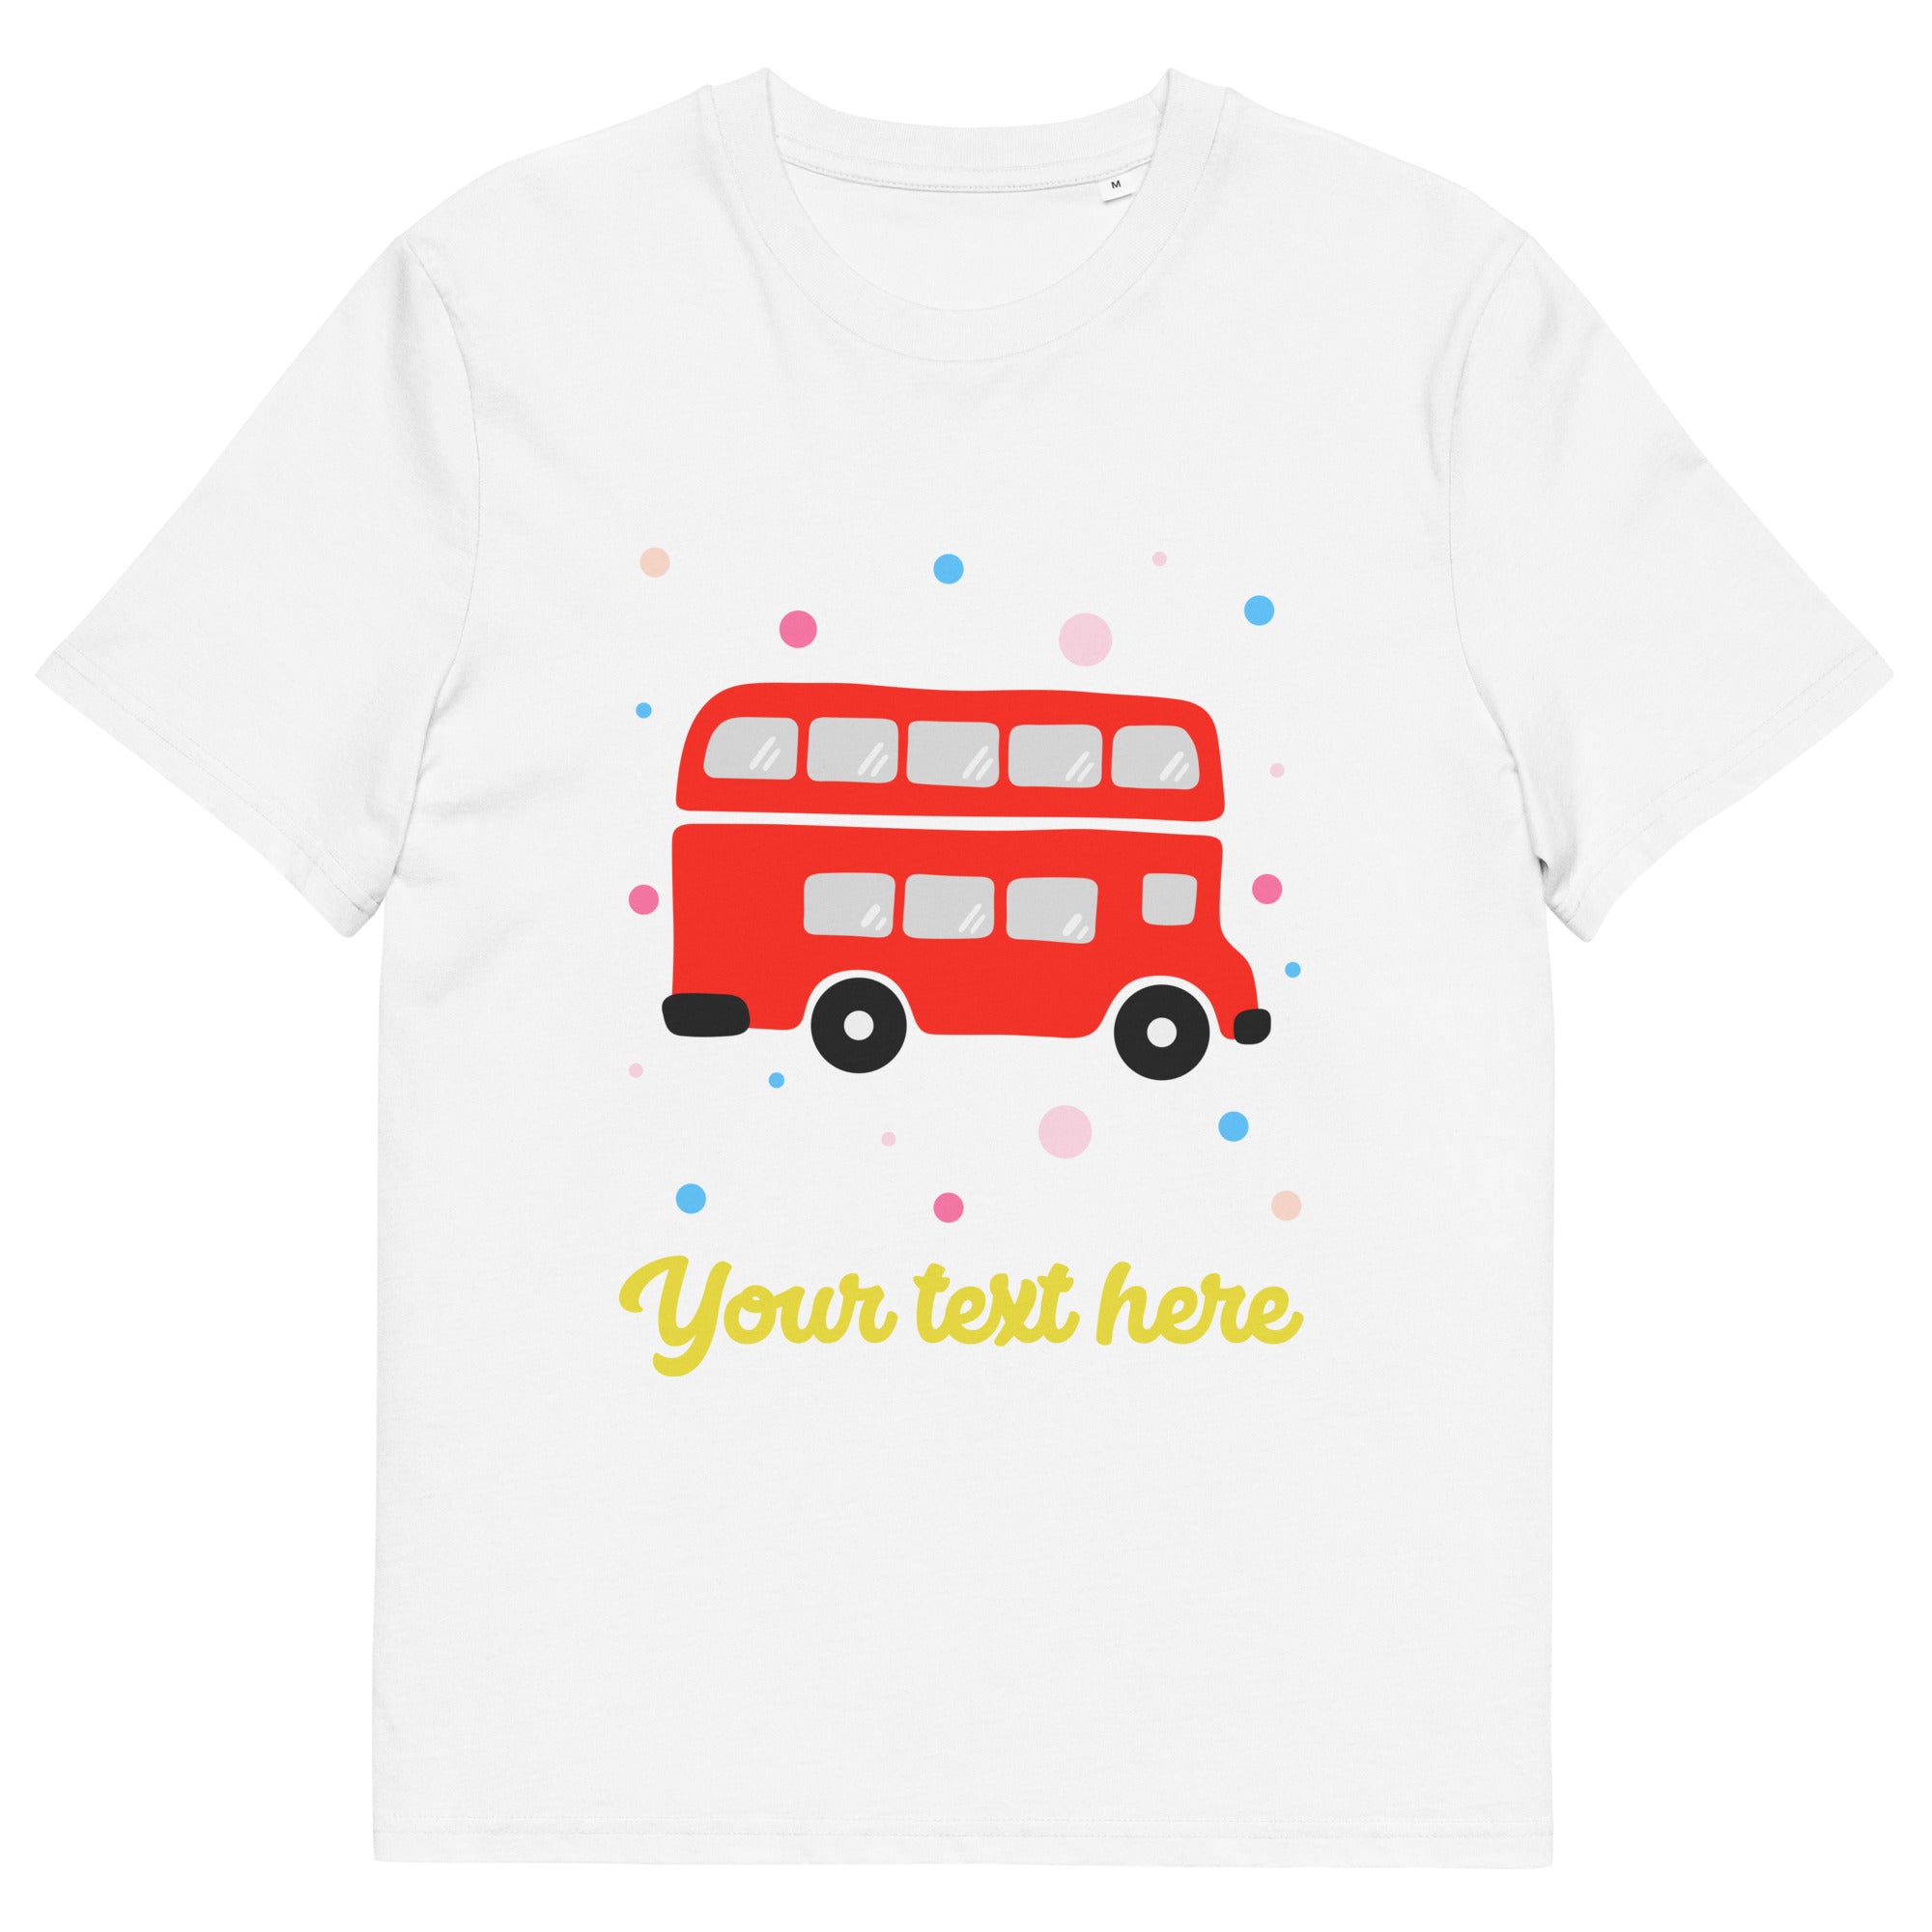 Personalised Custom Text - Organic Cotton Adults Unisex T-Shirt - London Doodles - Red Bus - White